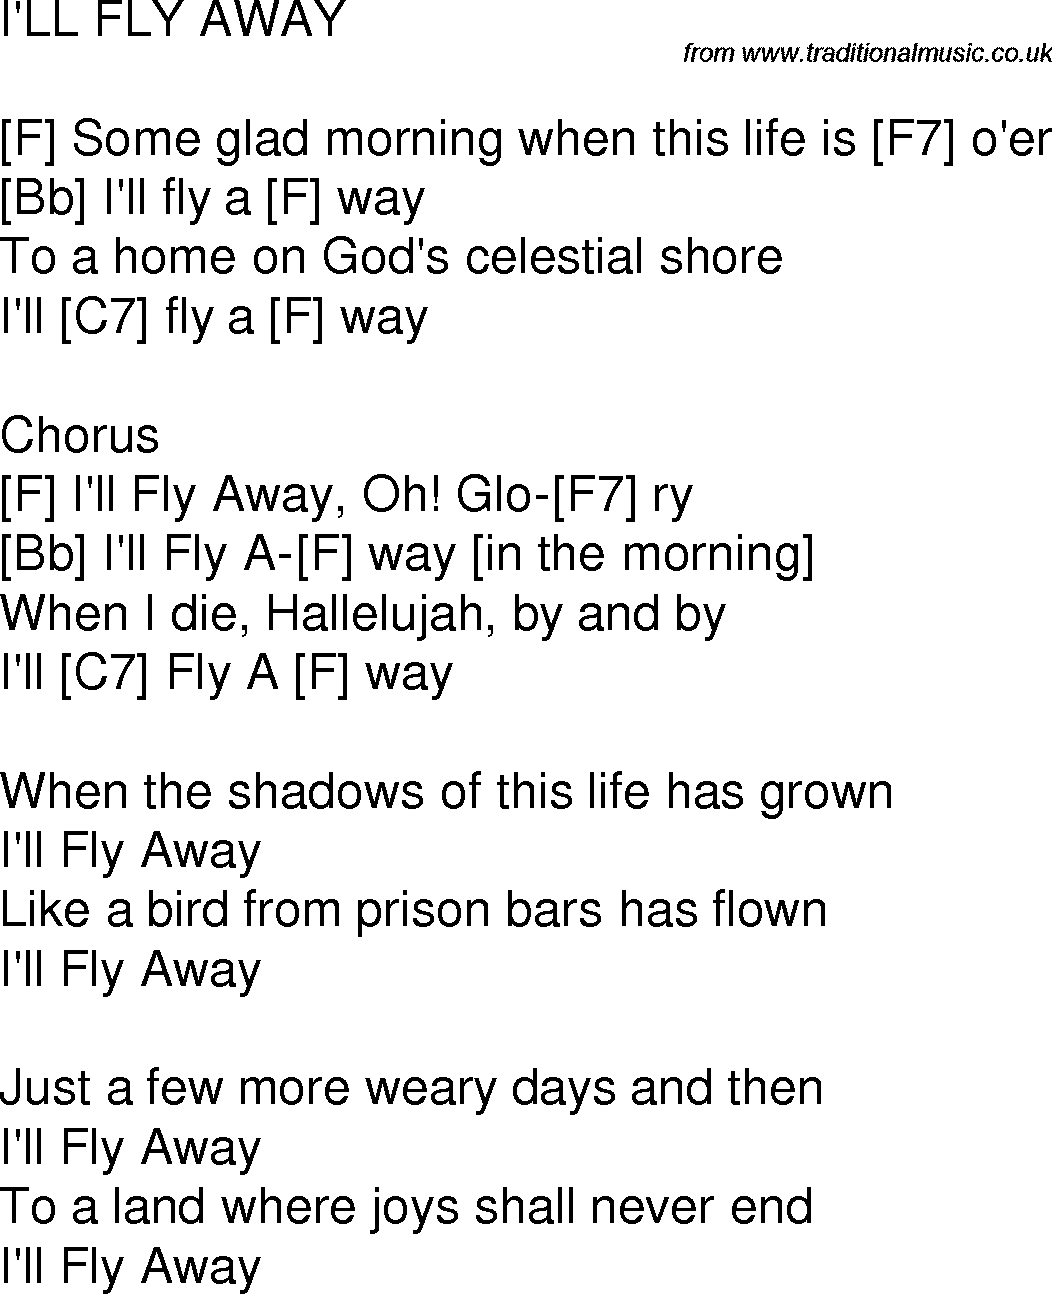 Old time song lyrics with chords for I'll Fly Away C